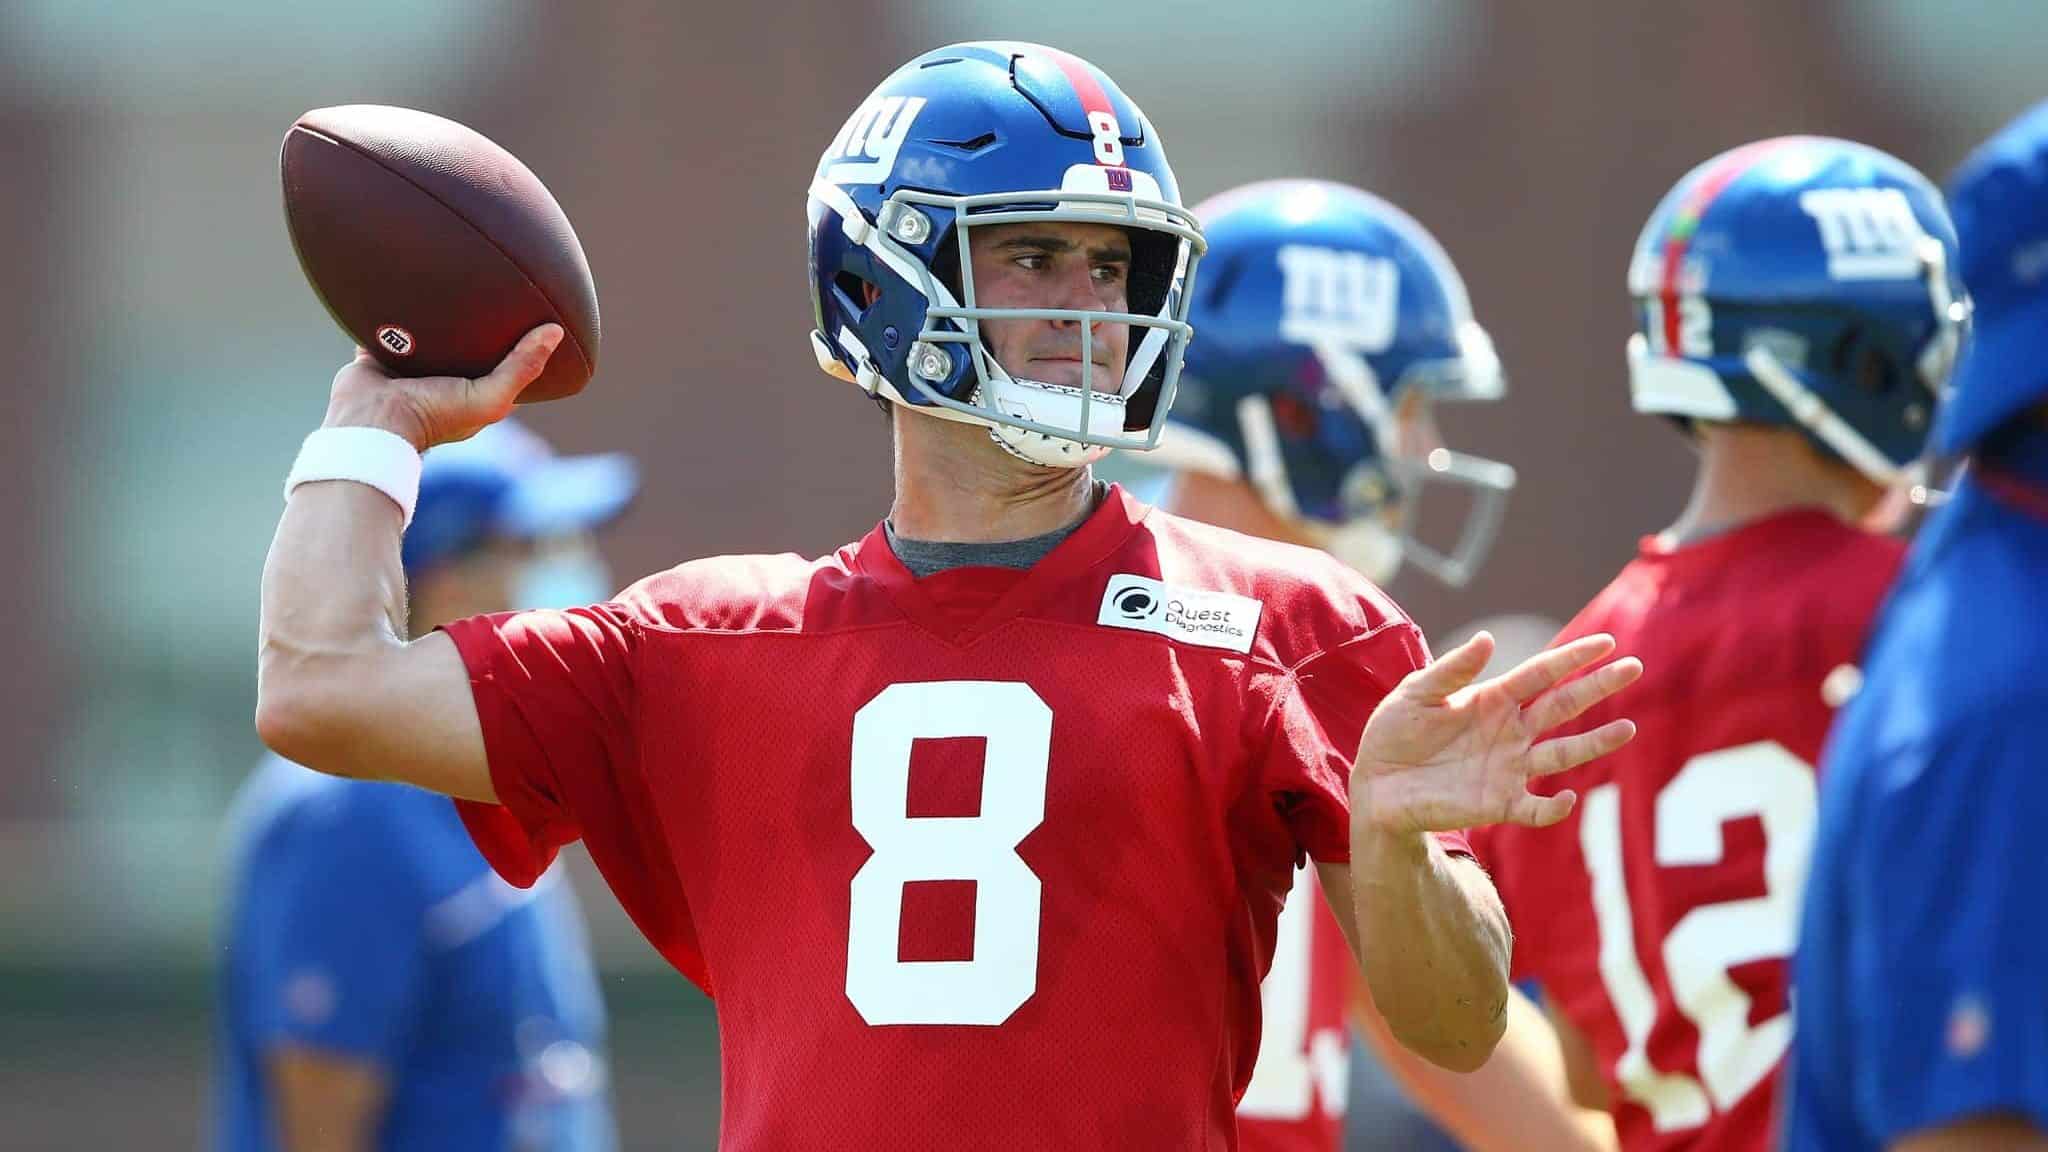 EAST RUTHERFORD, NEW JERSEY - AUGUST 23: Daniel Jones #8 of the New York Giants runs drills at NY Giants Quest Diagnostics Training Center on August 23, 2020 in East Rutherford, New Jersey.